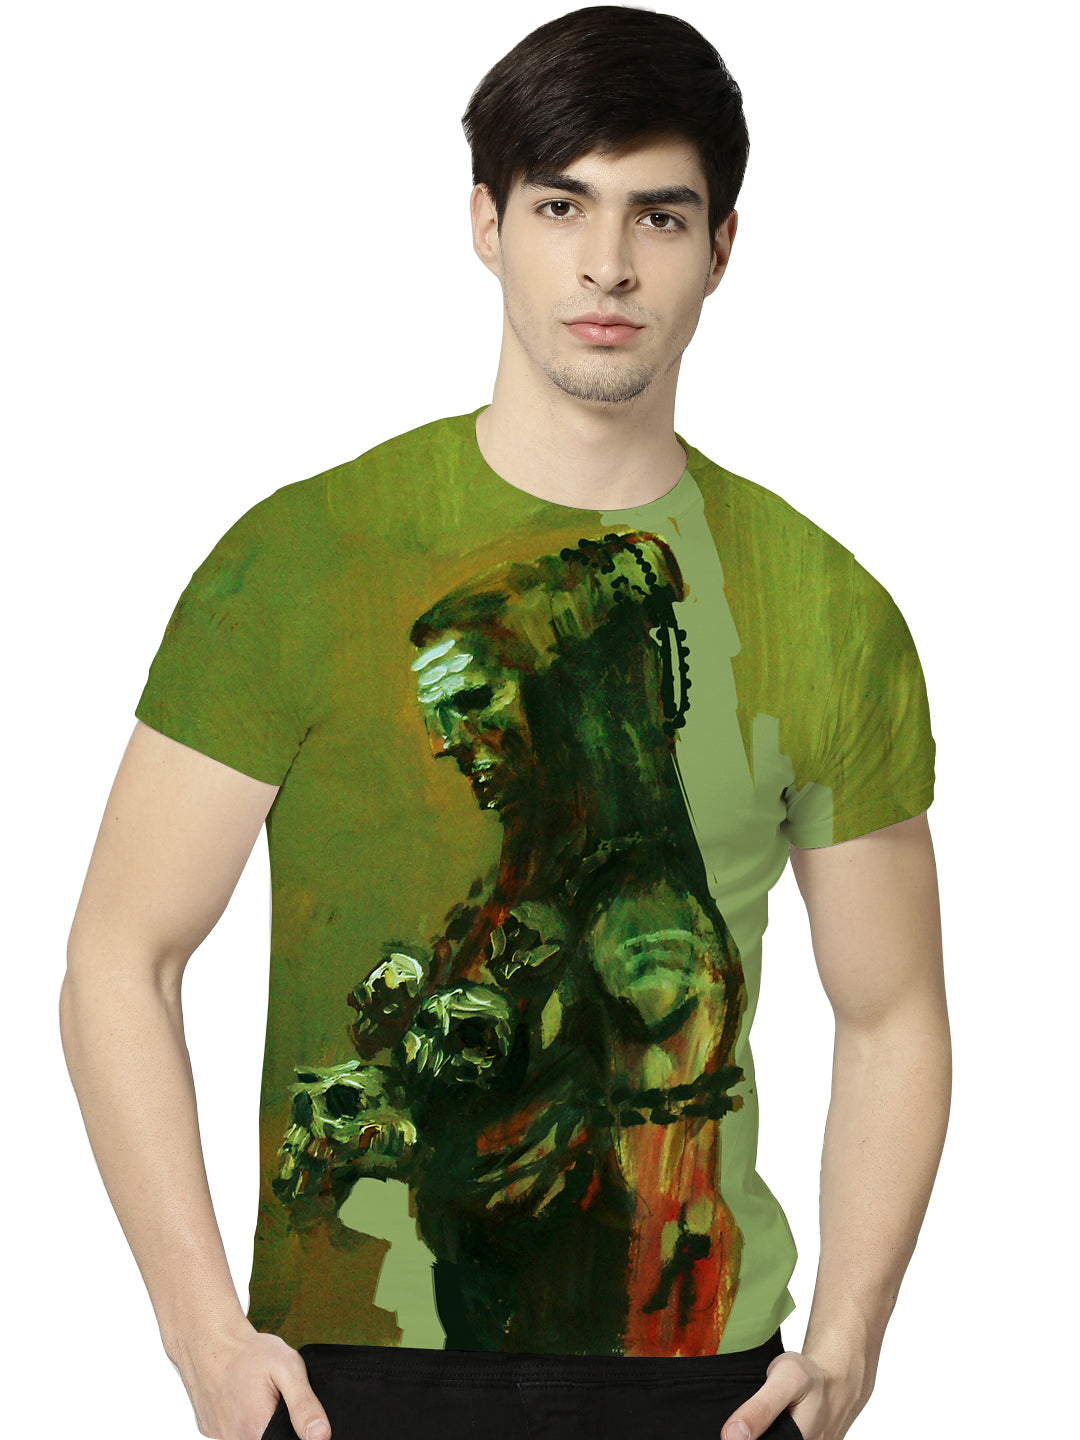 green shiva tshirt mundamala skull necklace Image of hindu god lord shiva smoking weed from chillum is printed on a premium polyester t shirt. This is an all over print tshirt hence the image covers both front and back this product is sold worldwide by standout shipped from india. visit www.standoutforever.com